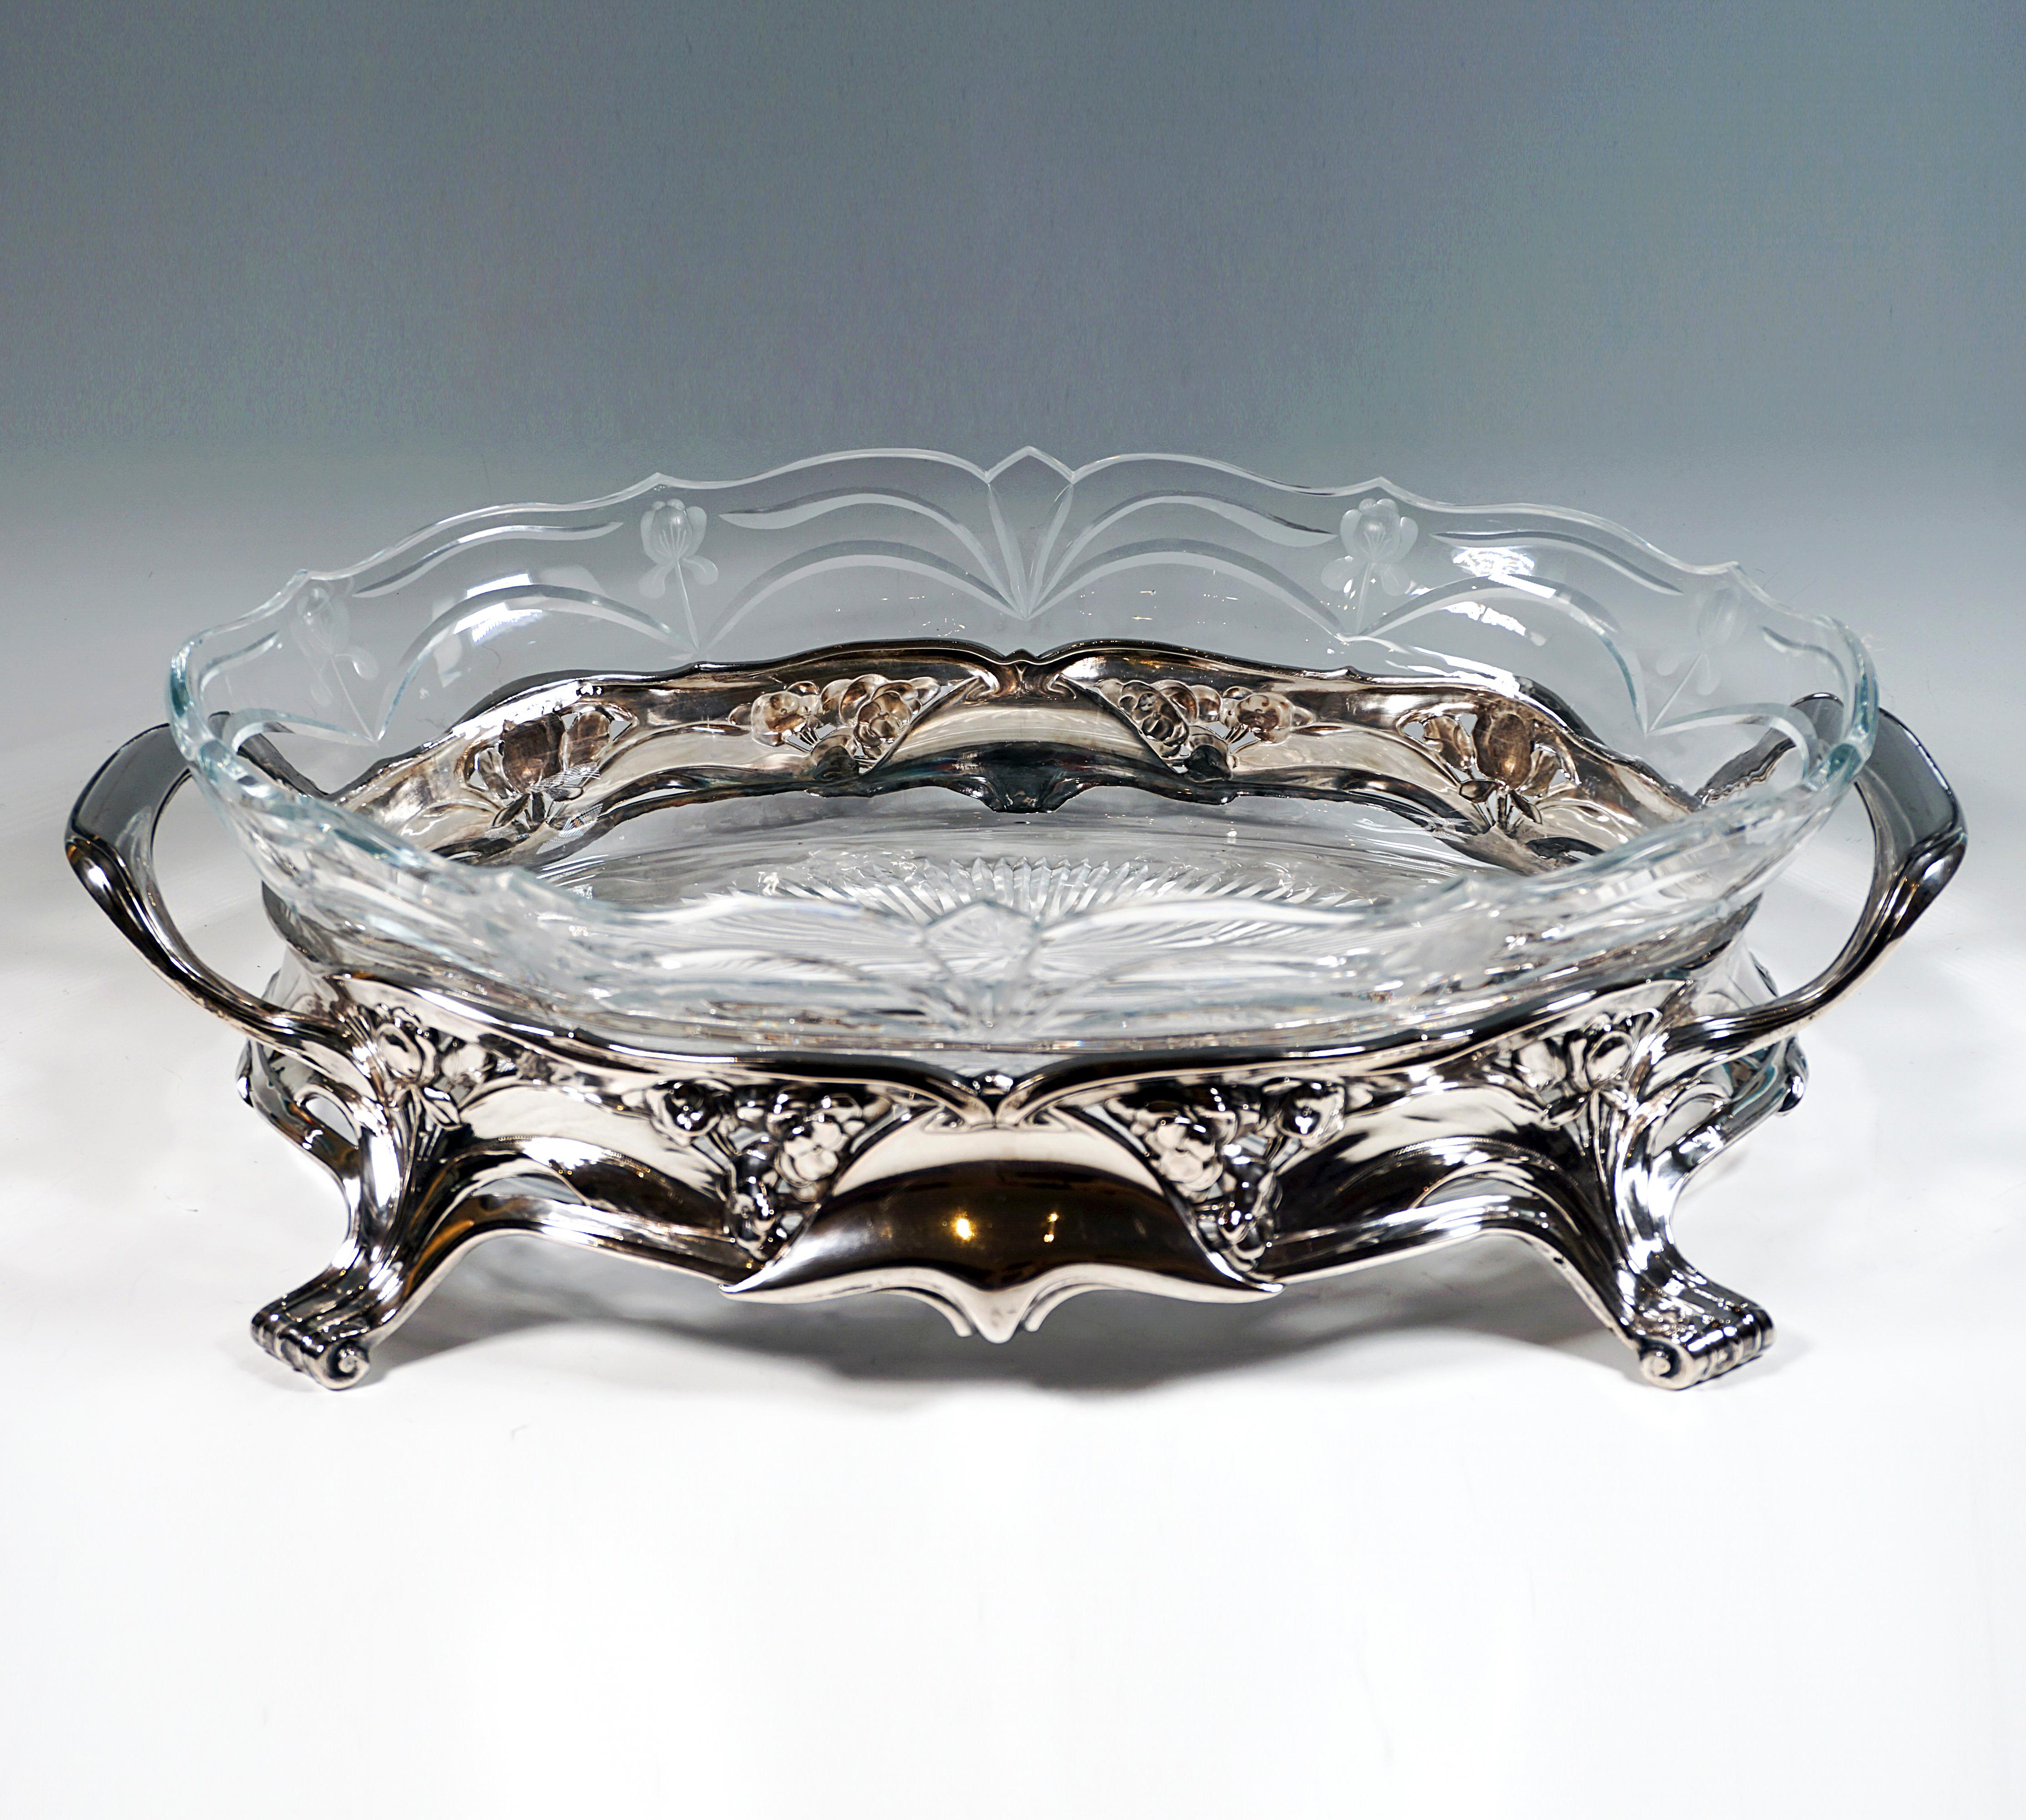 Elegant, festive silver vessel in wide oval base form with four projecting volute feet, on the front and back center asymmetrical panels holding together the surrounding leaf, flower and ribbon braid like clasps, slightly curved top 
edge, on the